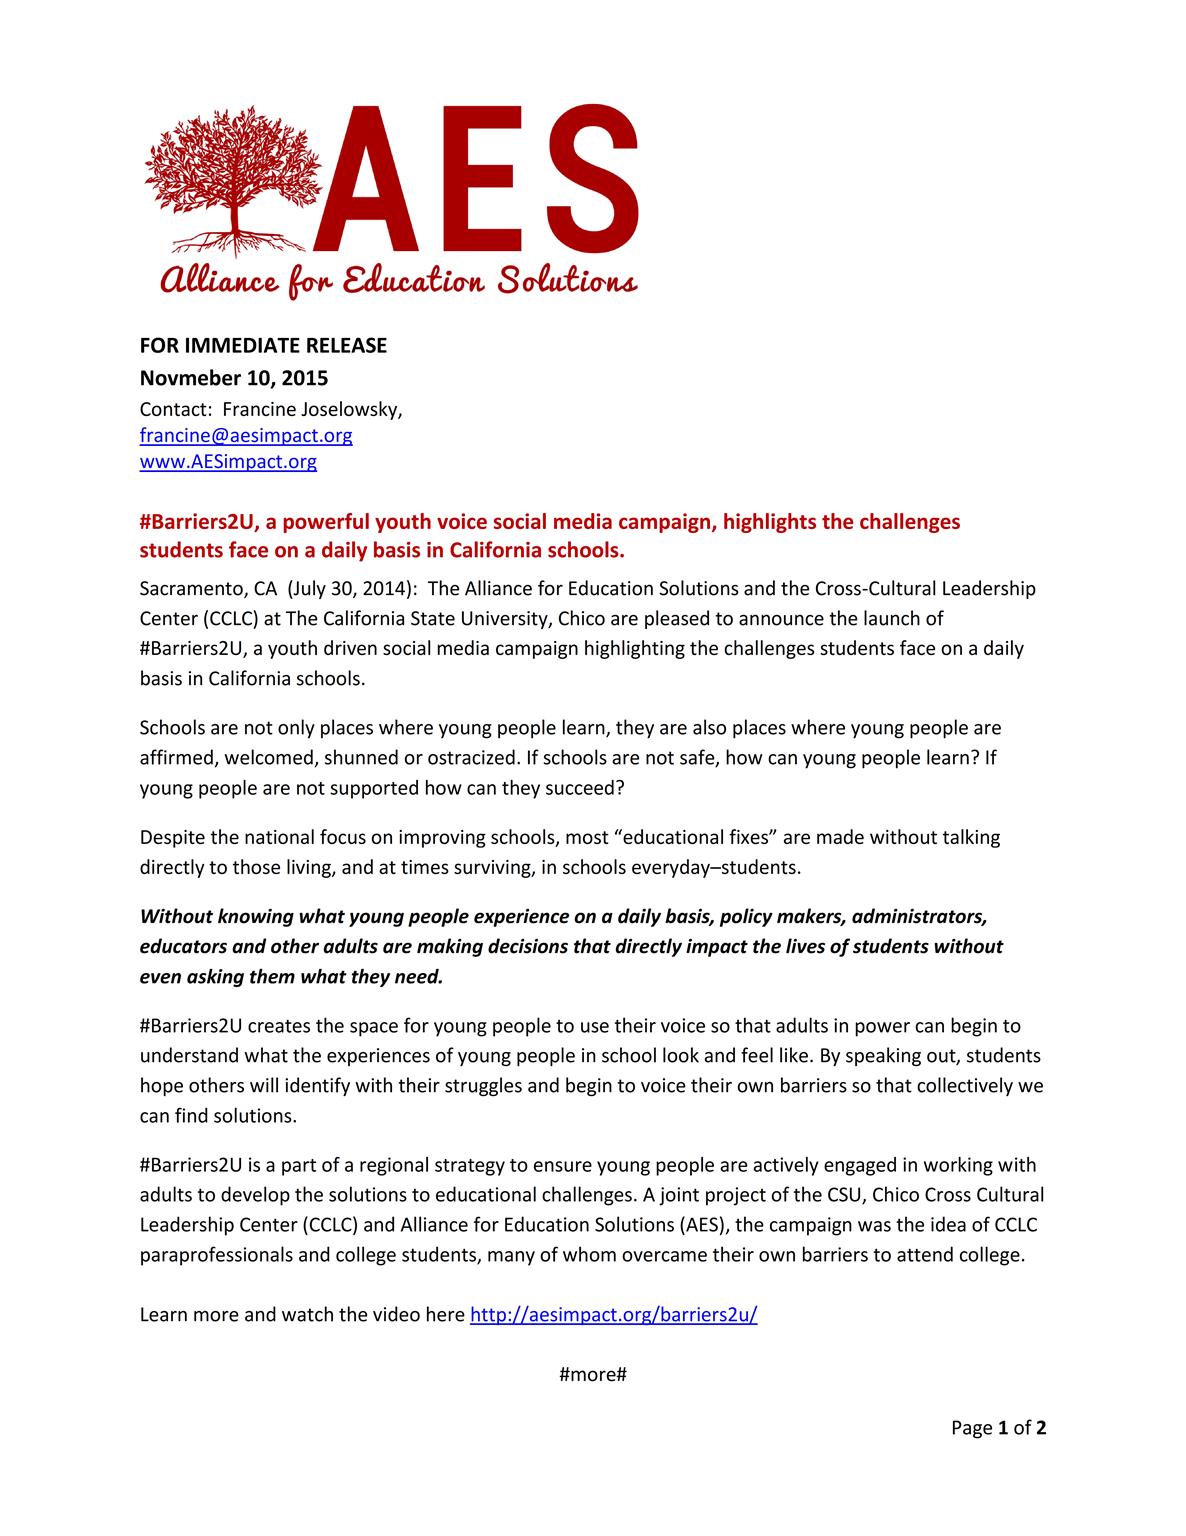 AES Press Release Barriers to You Nov 2015_001_r